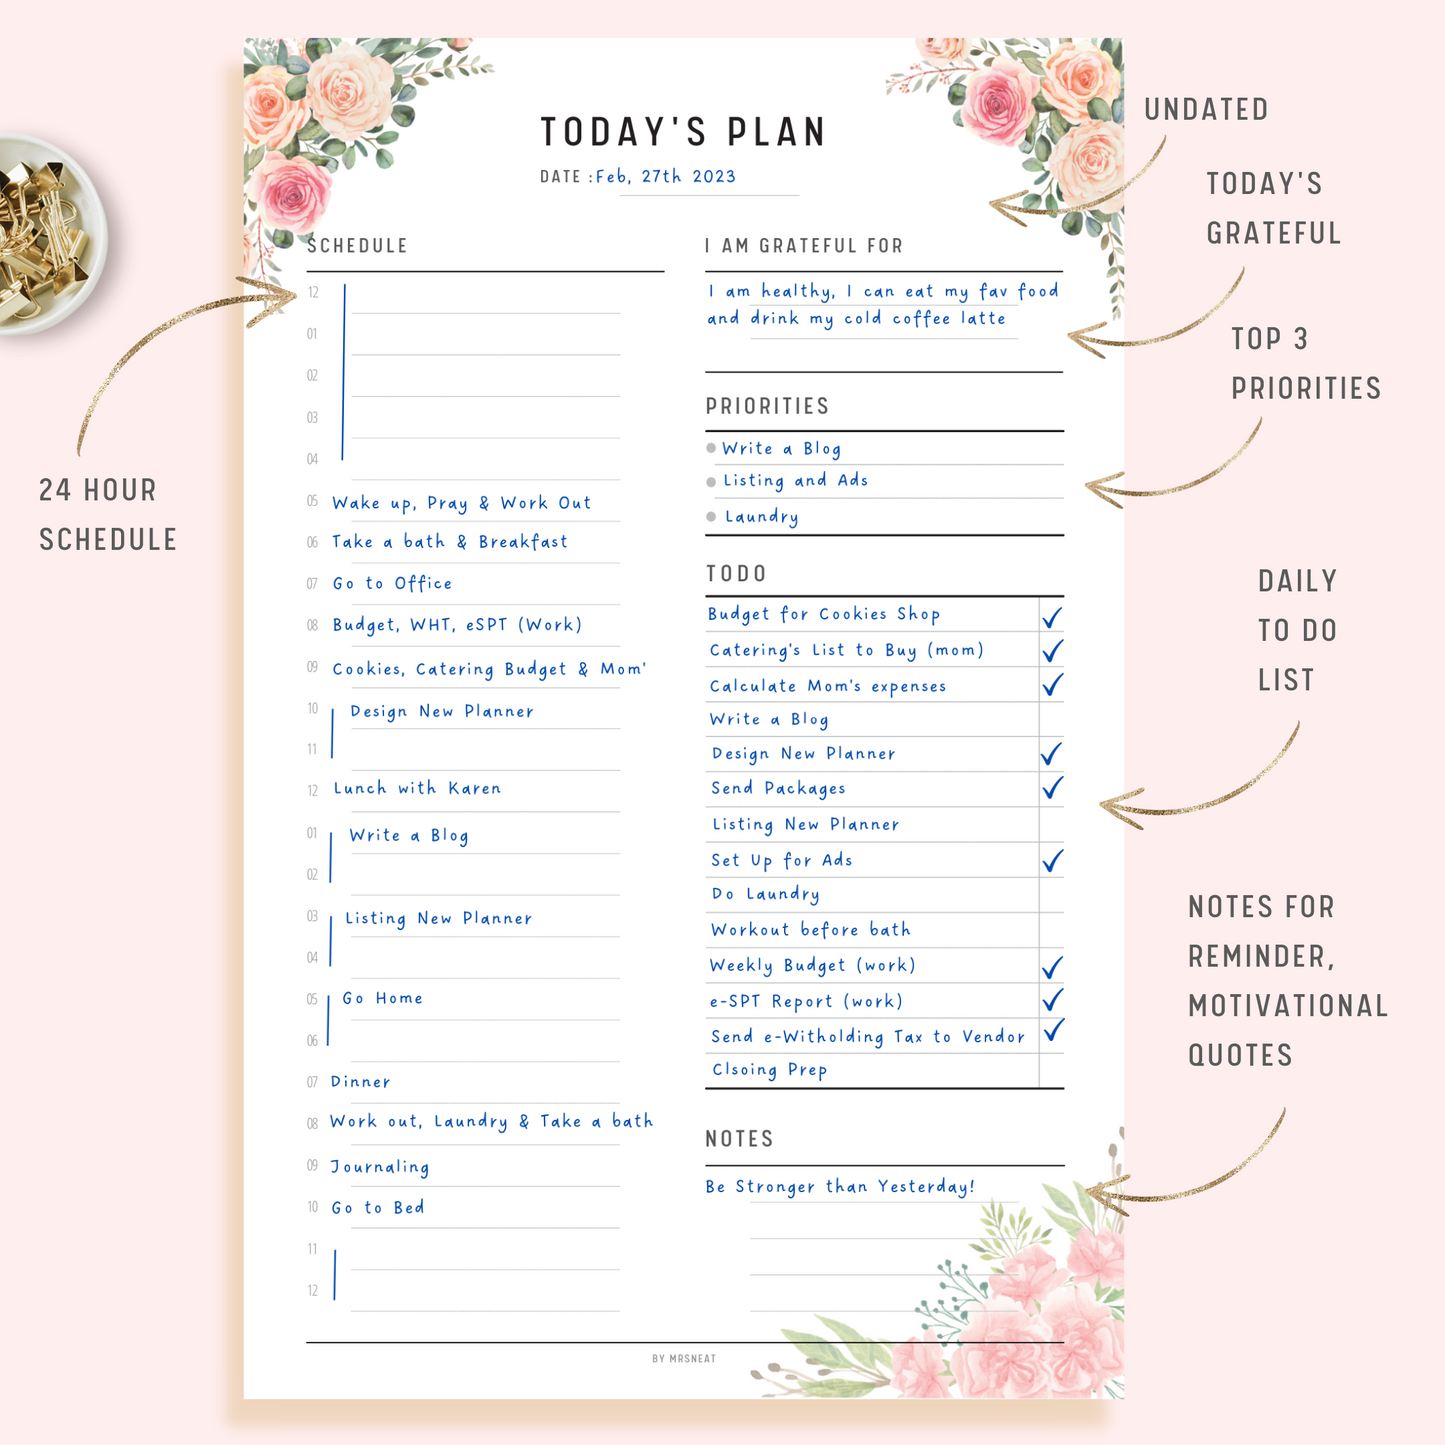 Pink Floral Daily Planner with Hourly Schedule for 24 Hour, room for To Do List and Priorities